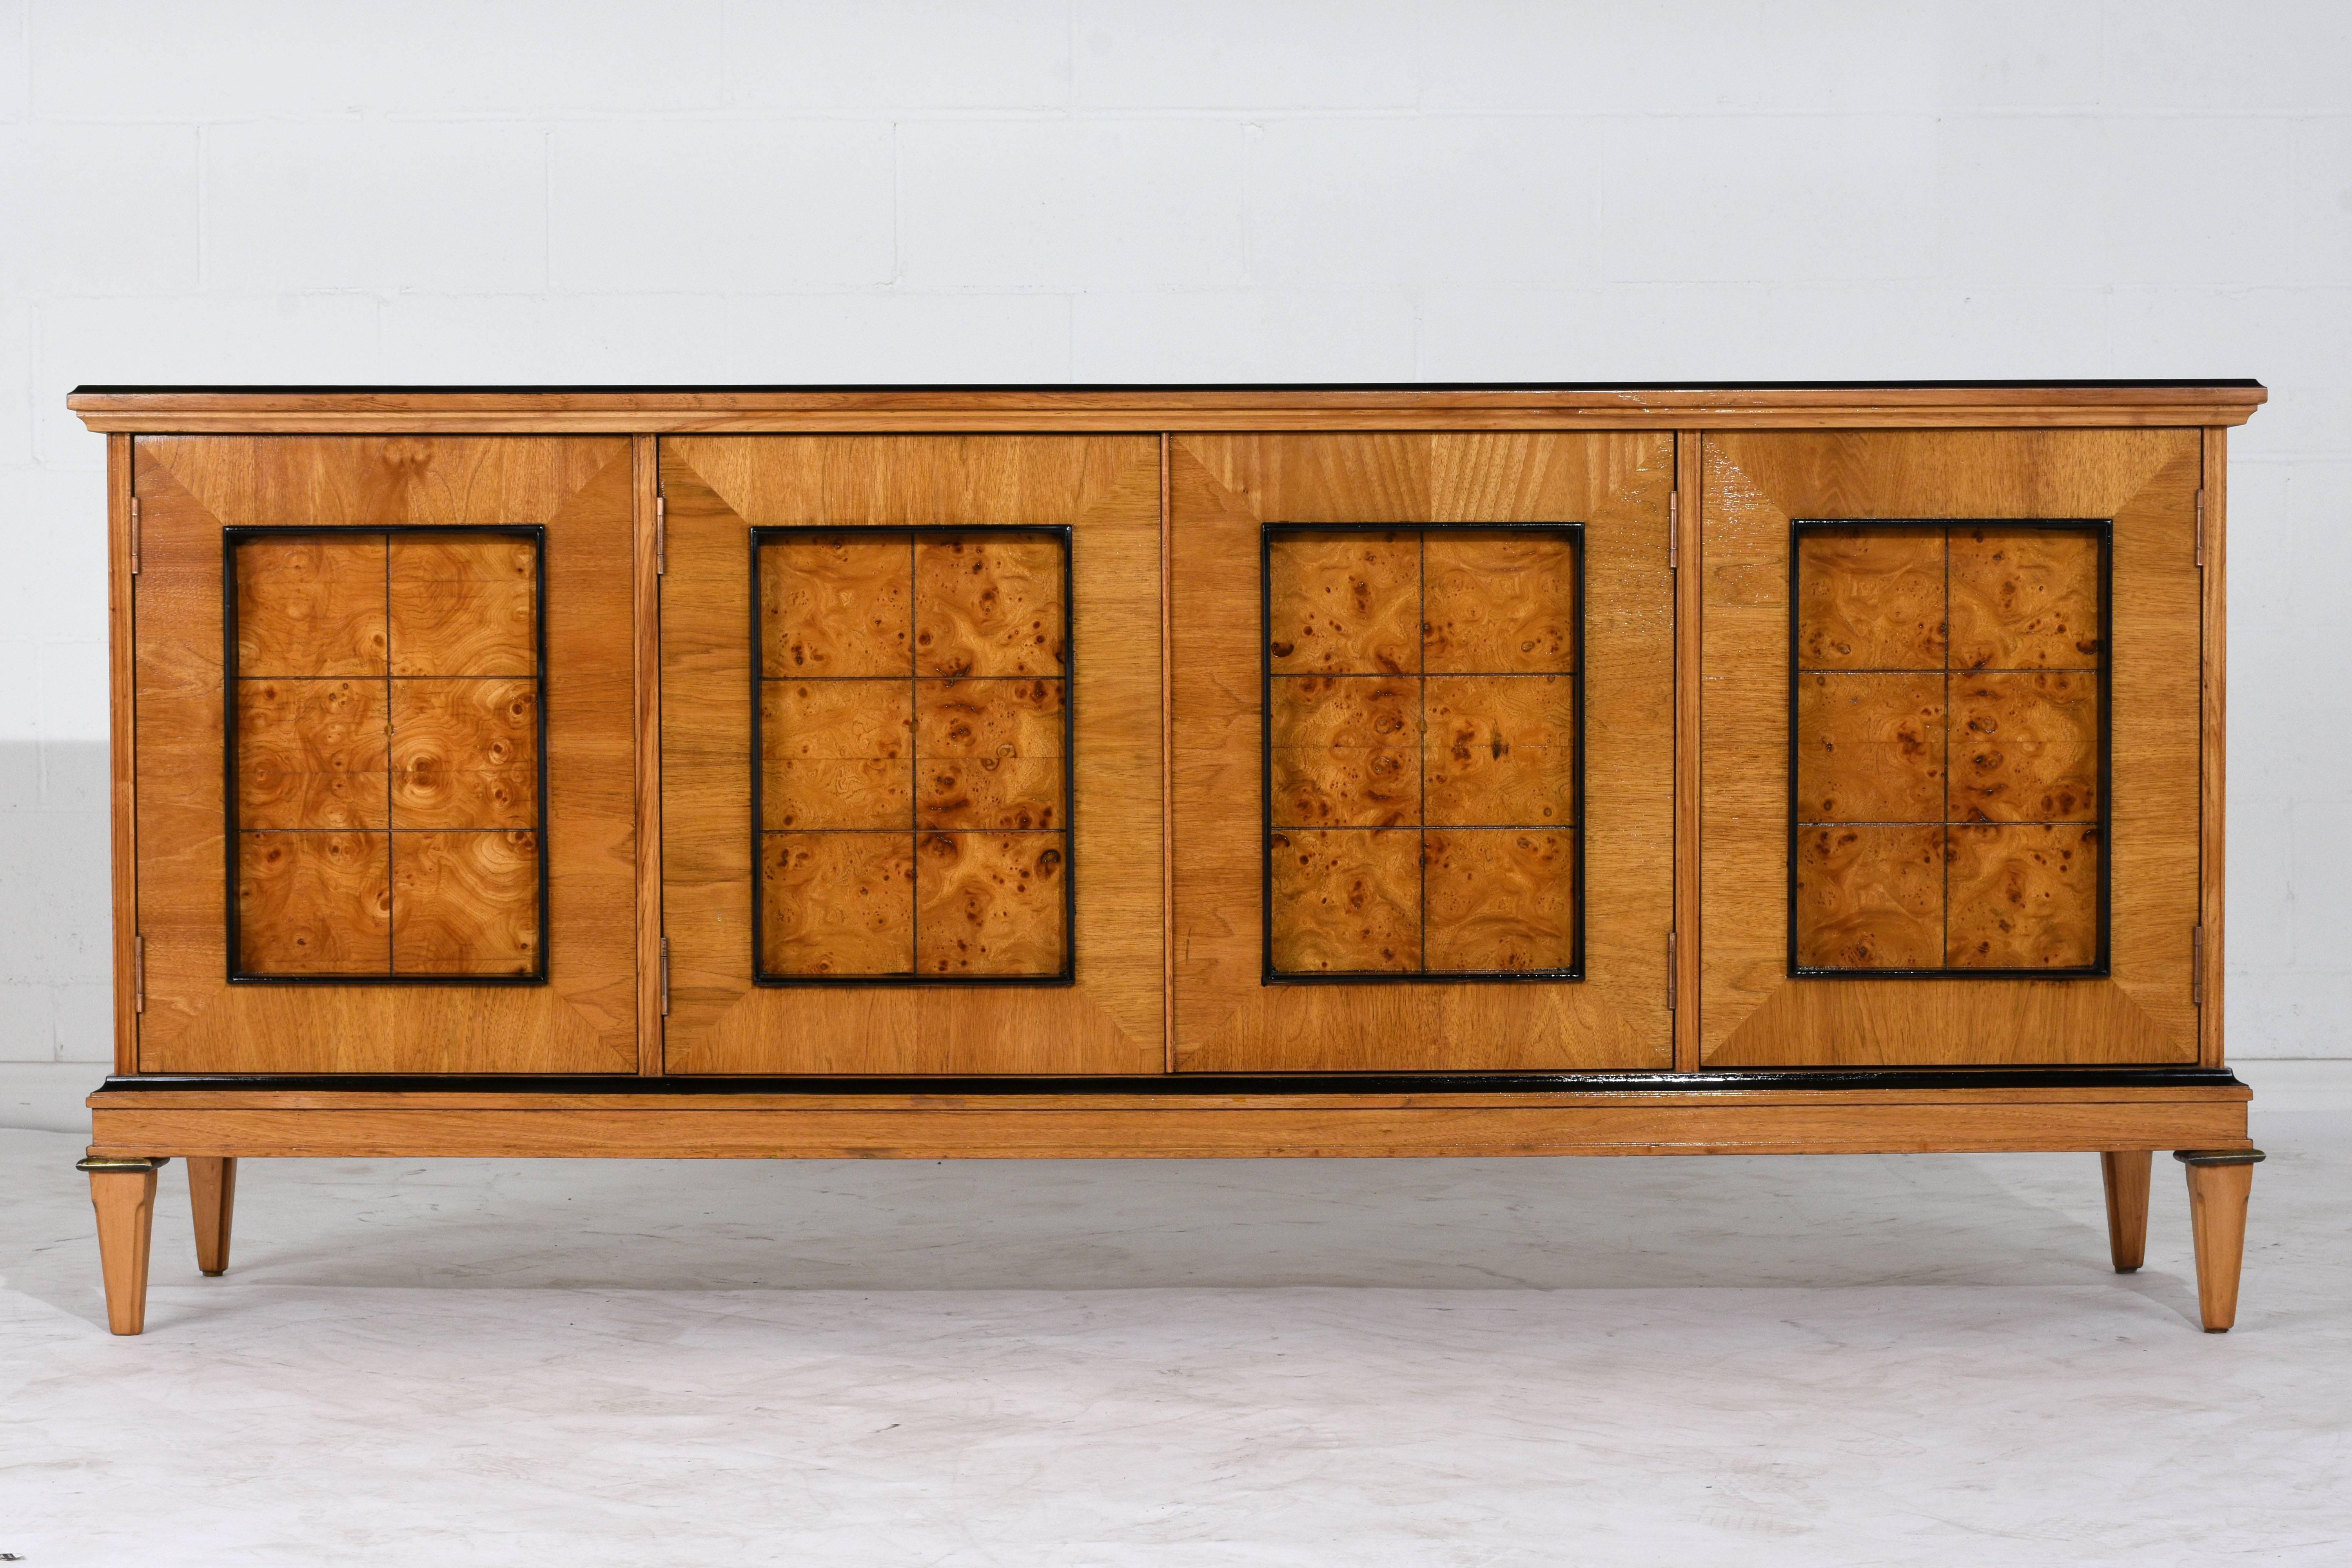 This 1950s Neoclassical-style buffet is made of wood covered in maple and walnut veneers finished in a light, golden color stain with a lacquered finish. The edges of the buffet are finished in a rich black color. The four cabinet doors have large